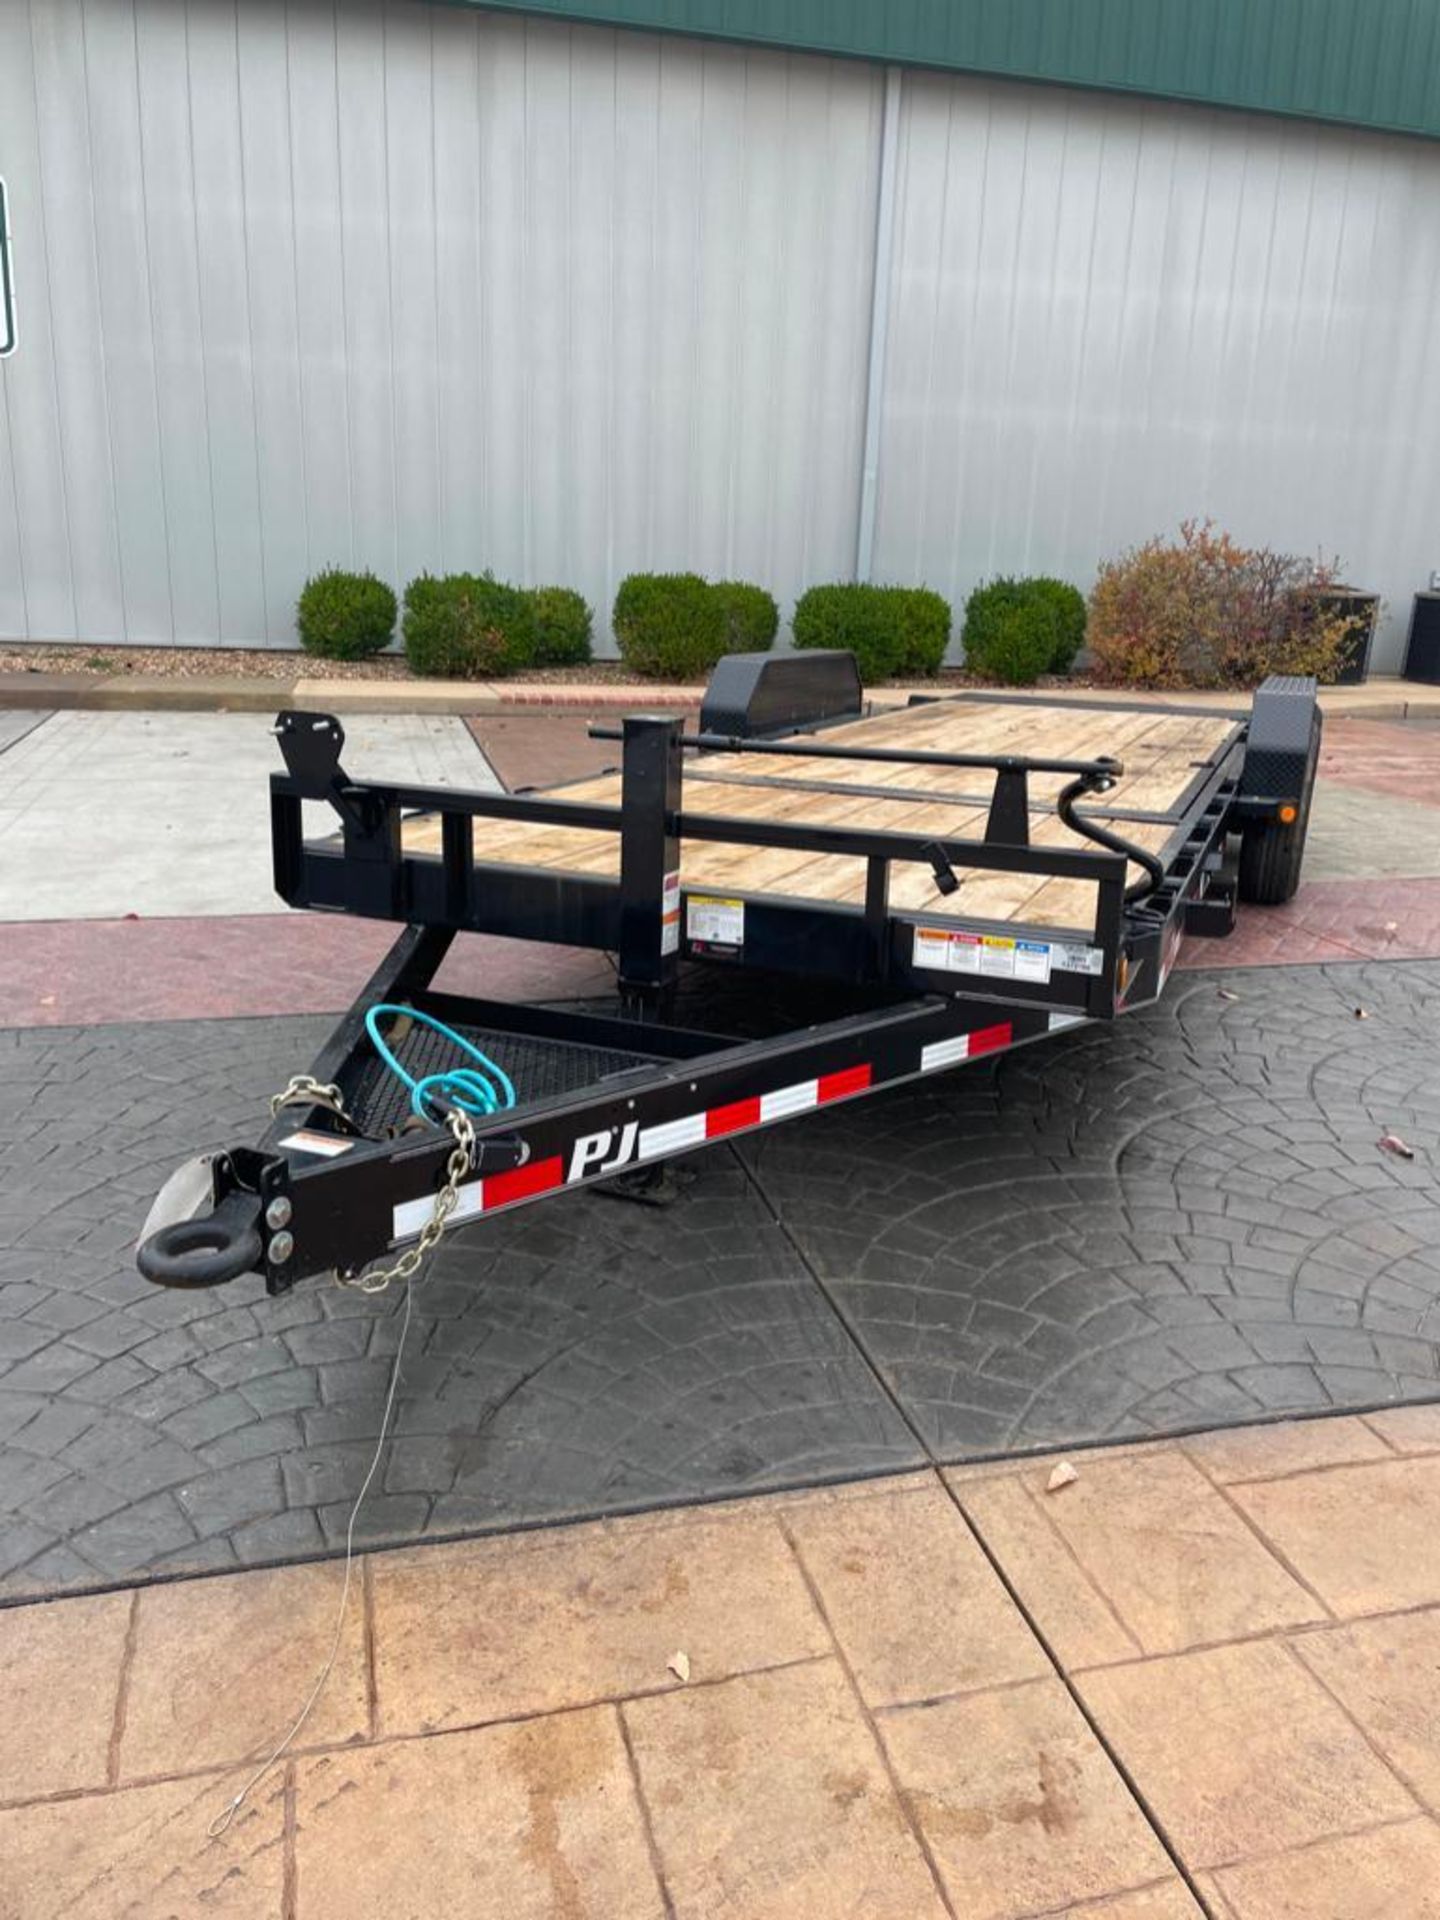 2022 P.J. Trailers Utility Trailer, Vin#4P51C2728N1372160, Pocket Stakes, Power Coated Tough, 14,000 - Image 2 of 20